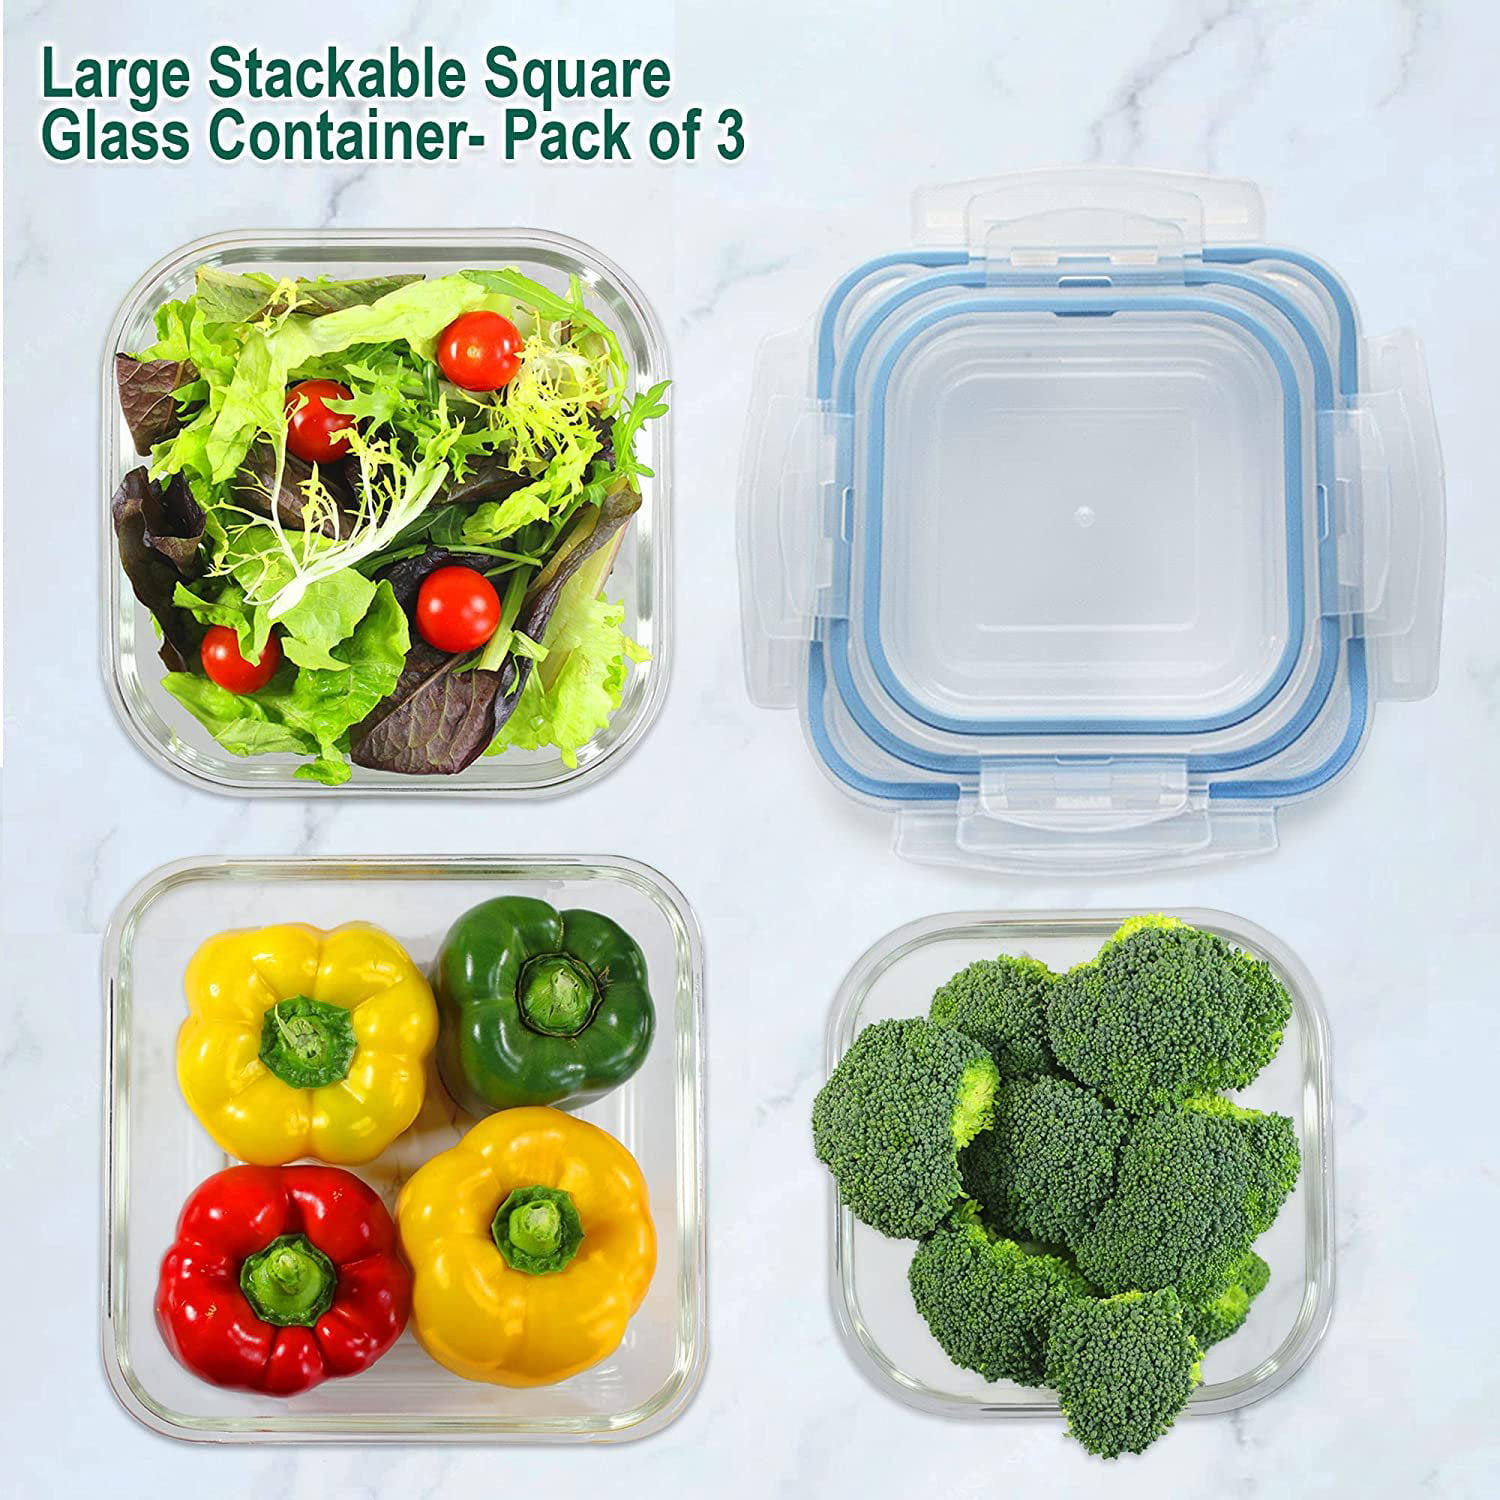  Large Glass Food Storage Containers 4 Pc (2700ML/ 91